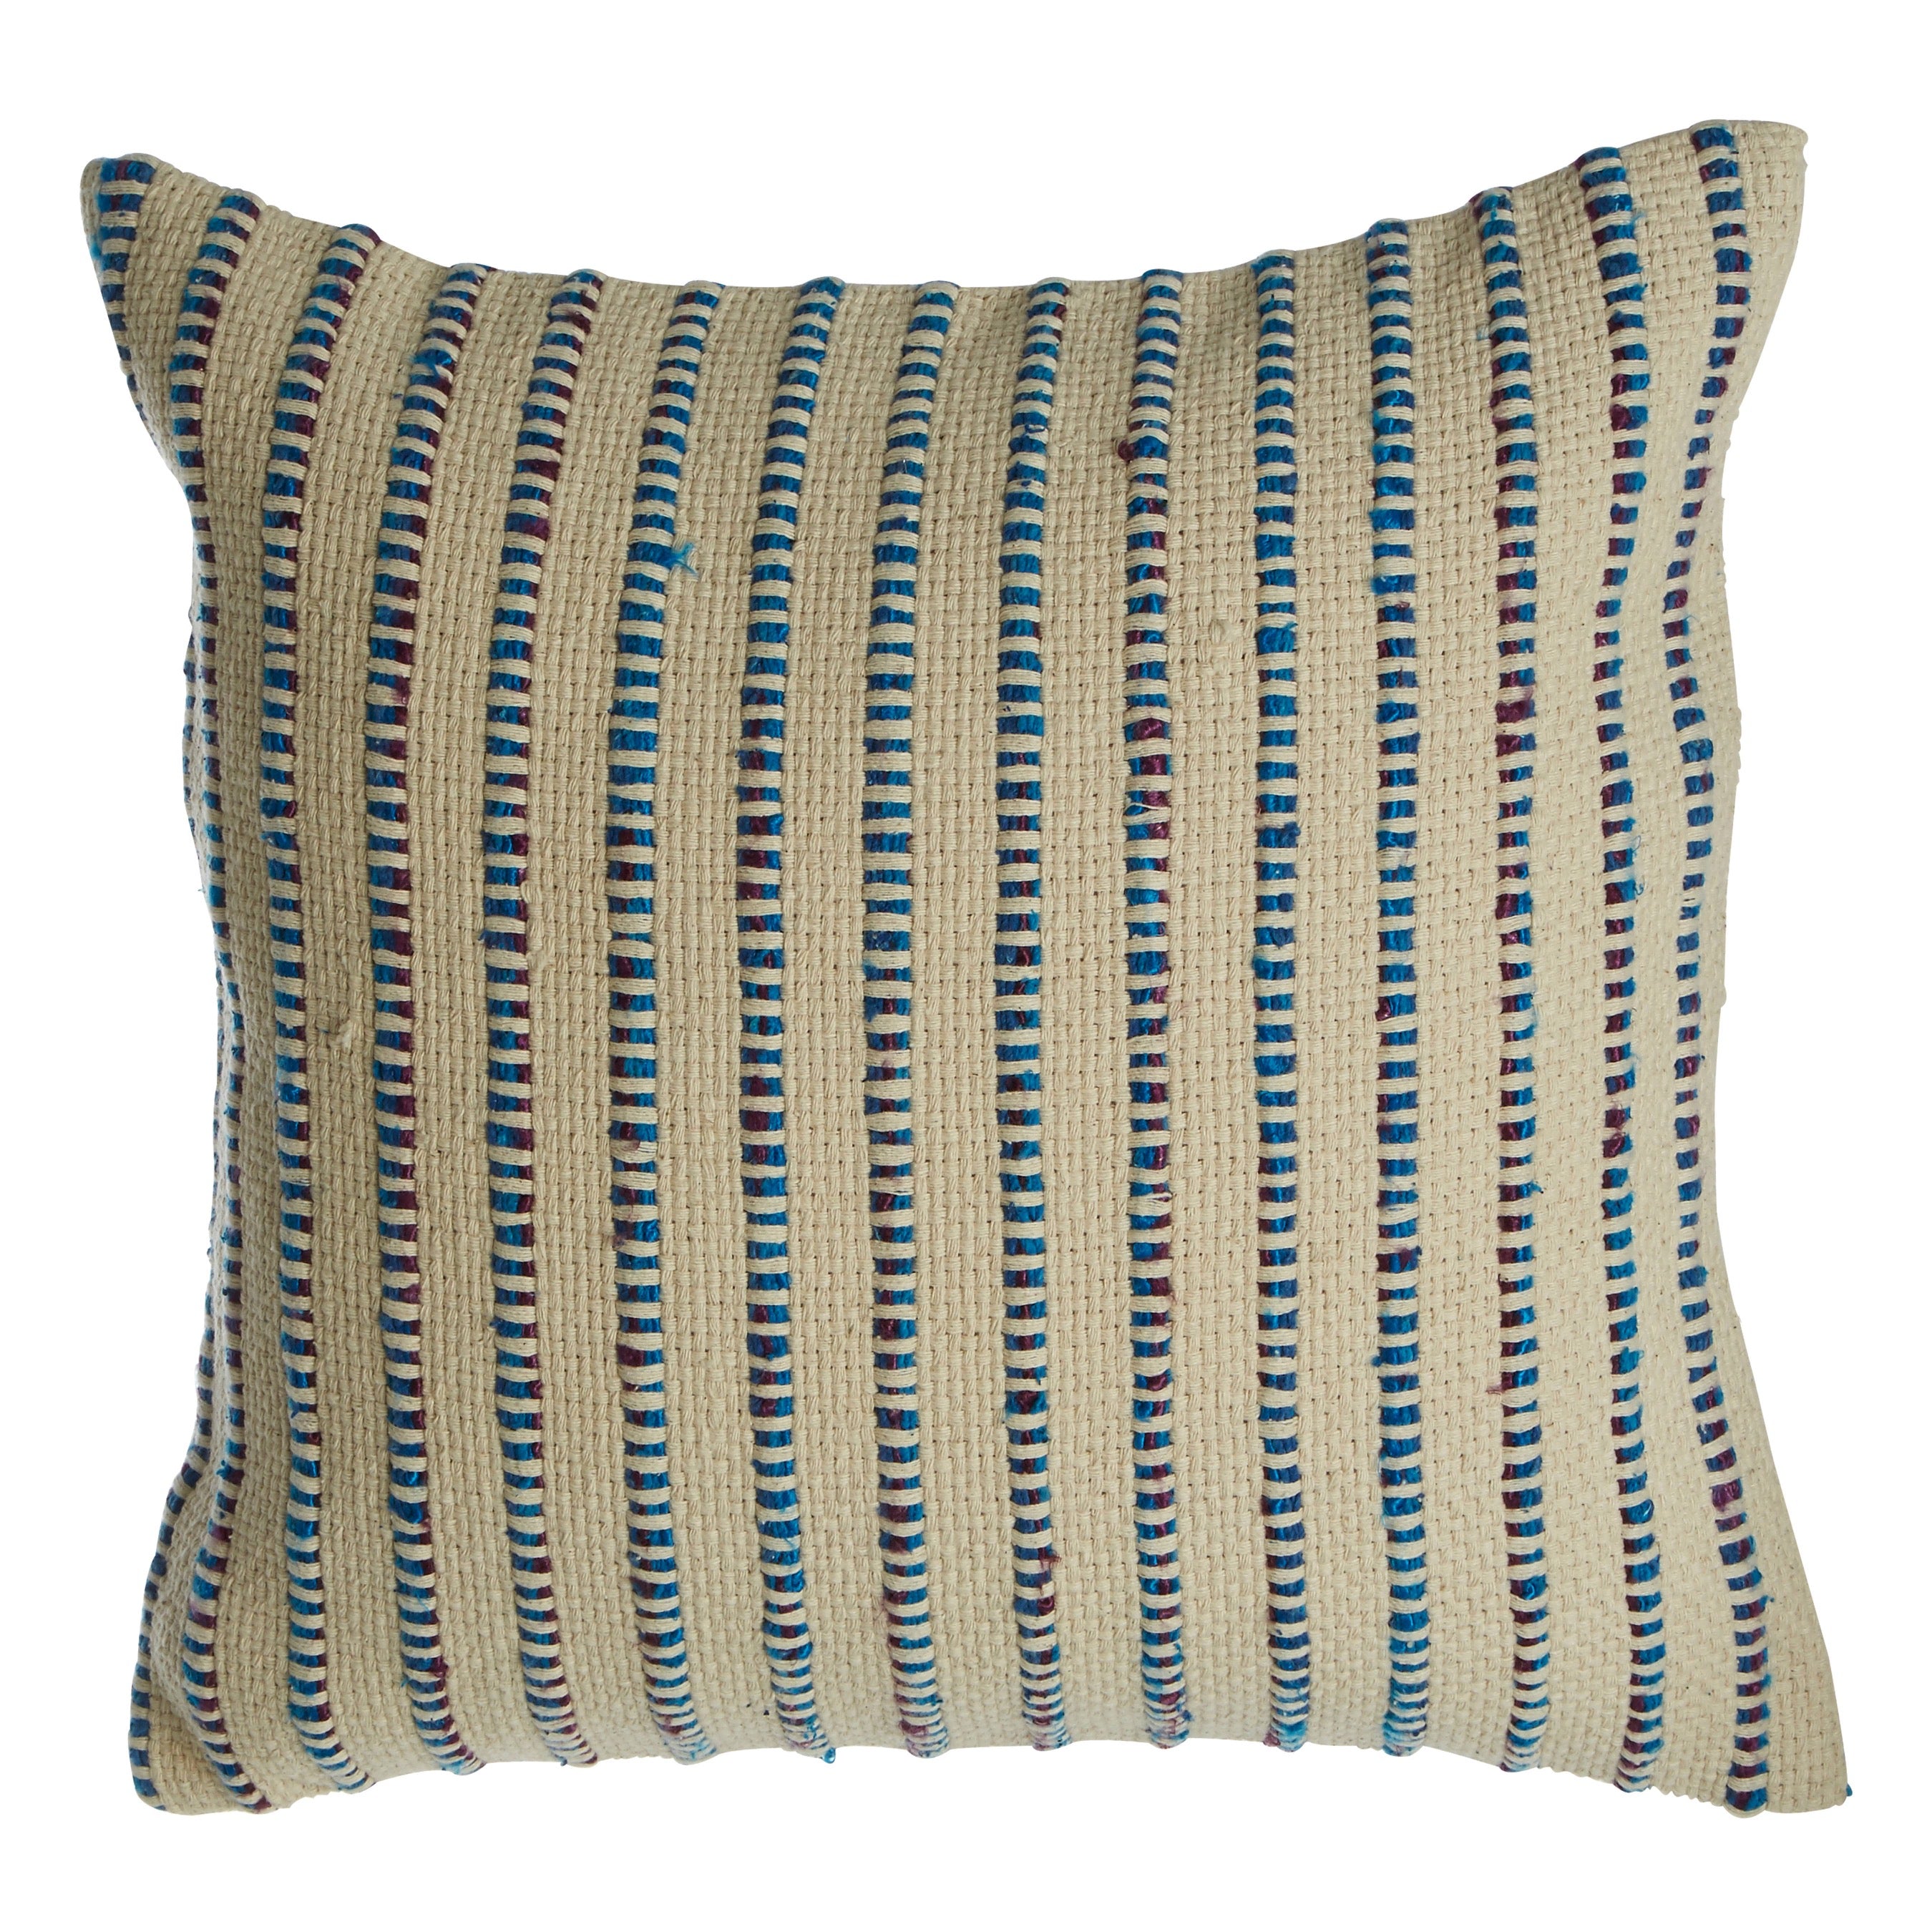 Striped Woven Cotton Cushion - Outlet - Save 20%